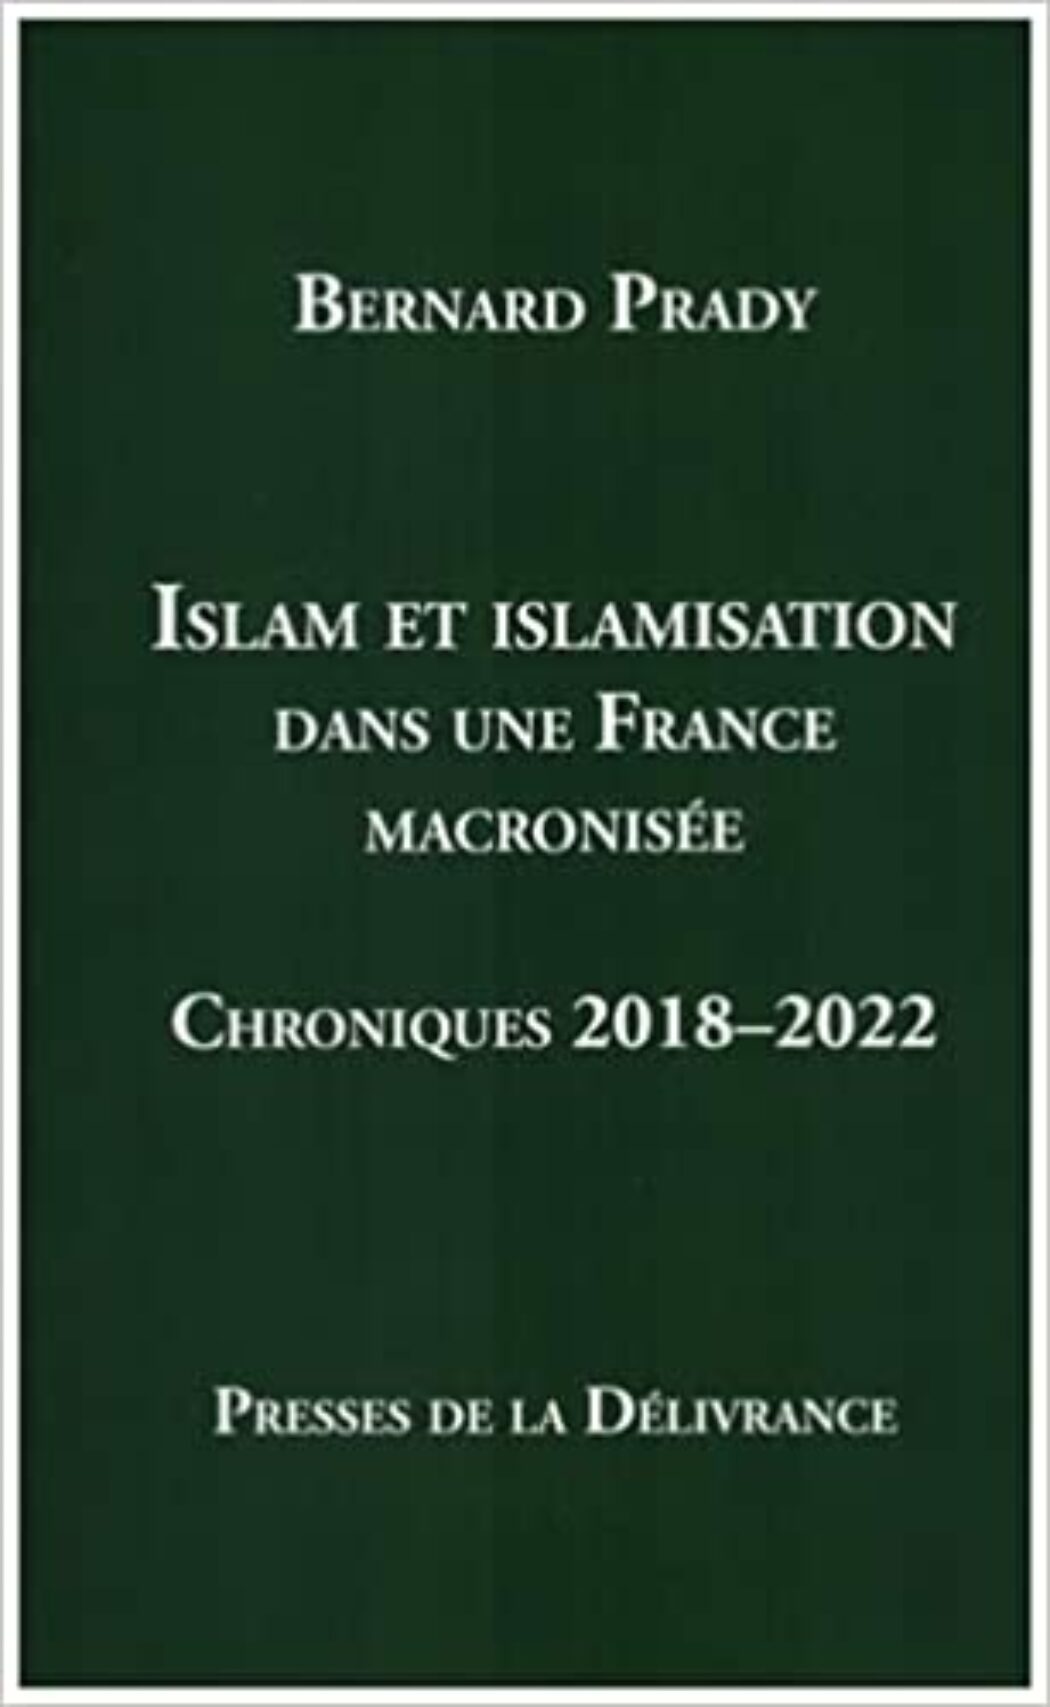 D comme Dhimmi